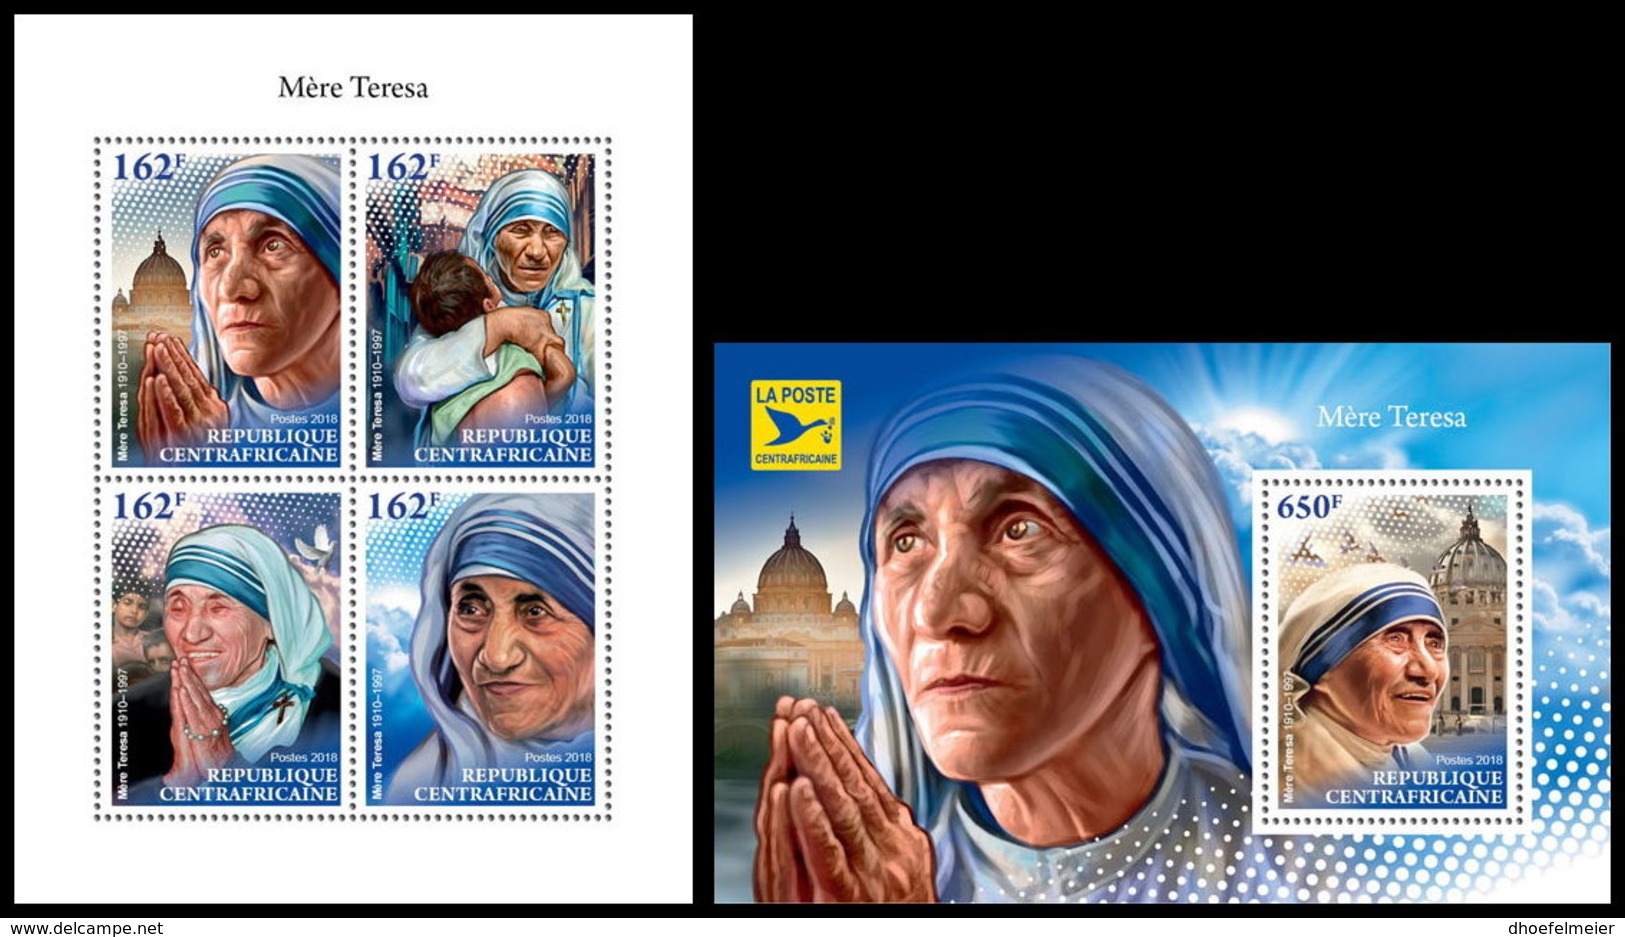 CENTRAL AFRICA 2018 **MNH SMALL Mother Teresa Mutter Teresa Mere Teresa M/S+S/S - OFFICIAL ISSUE - DH1845 - Mère Teresa